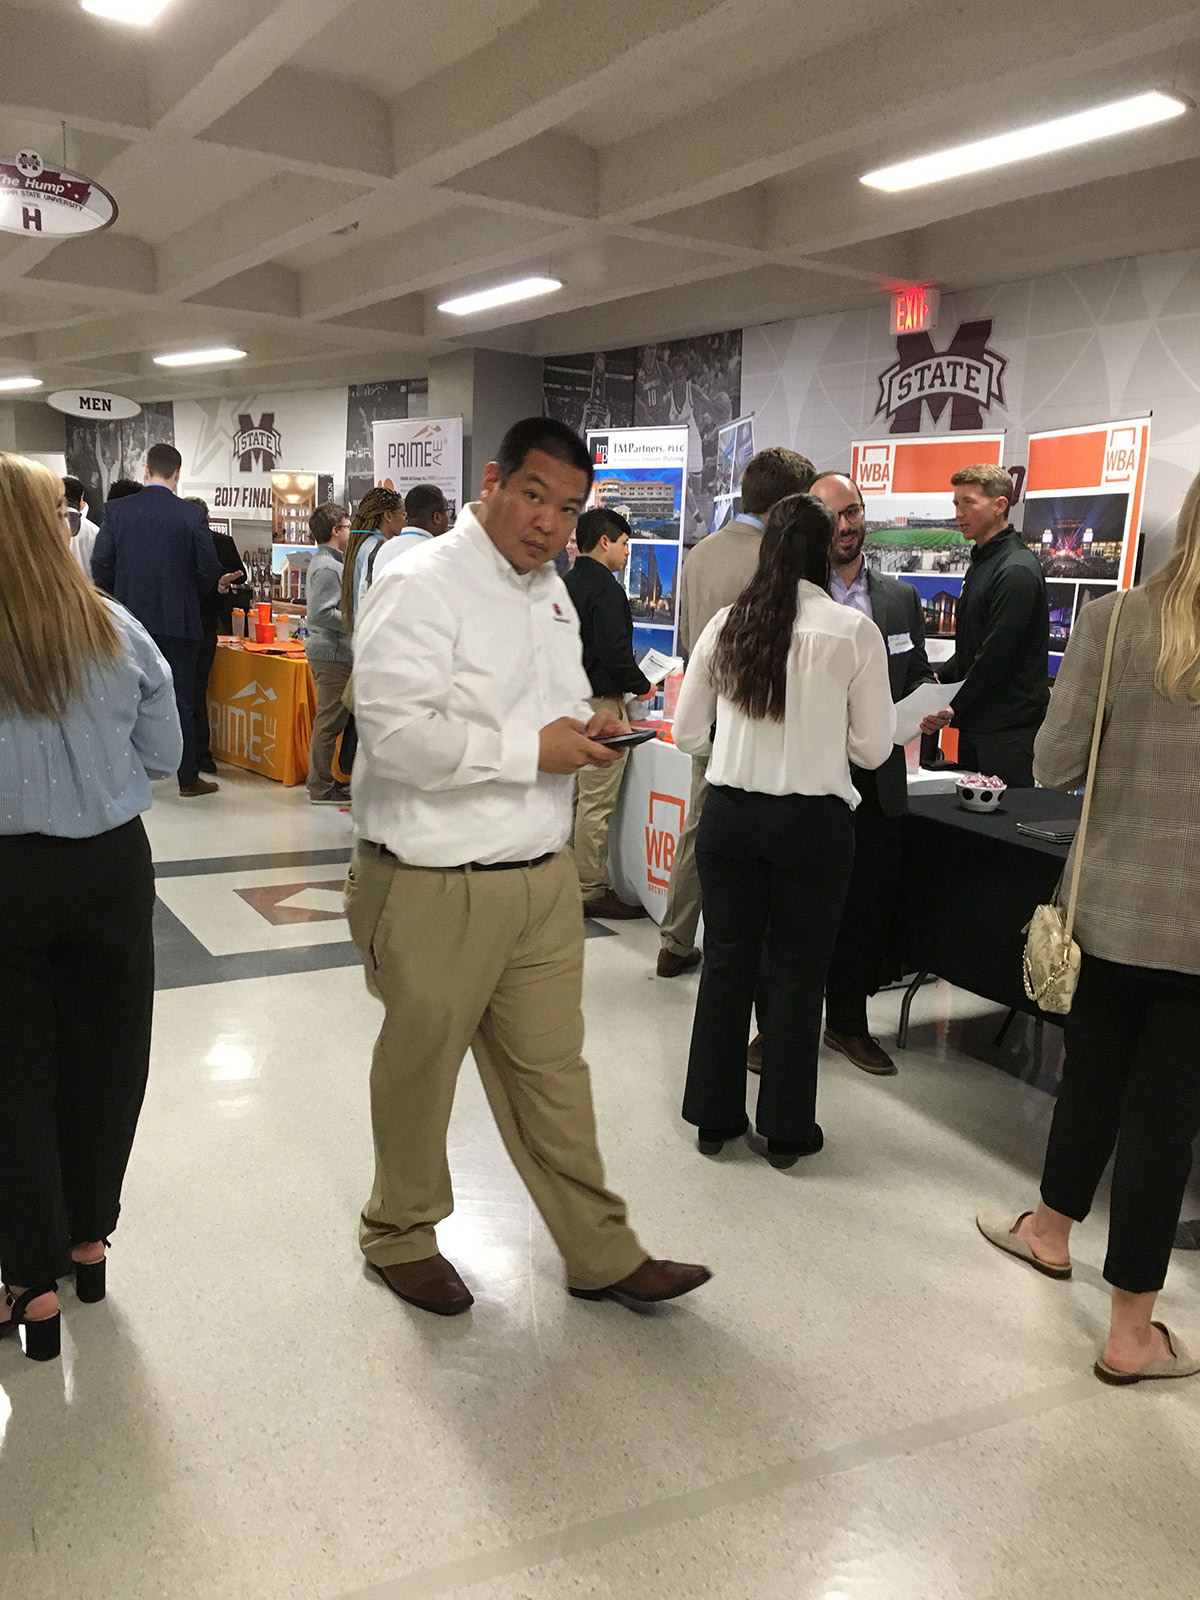 architecture students talk with potential employers at the MSU Career Expo